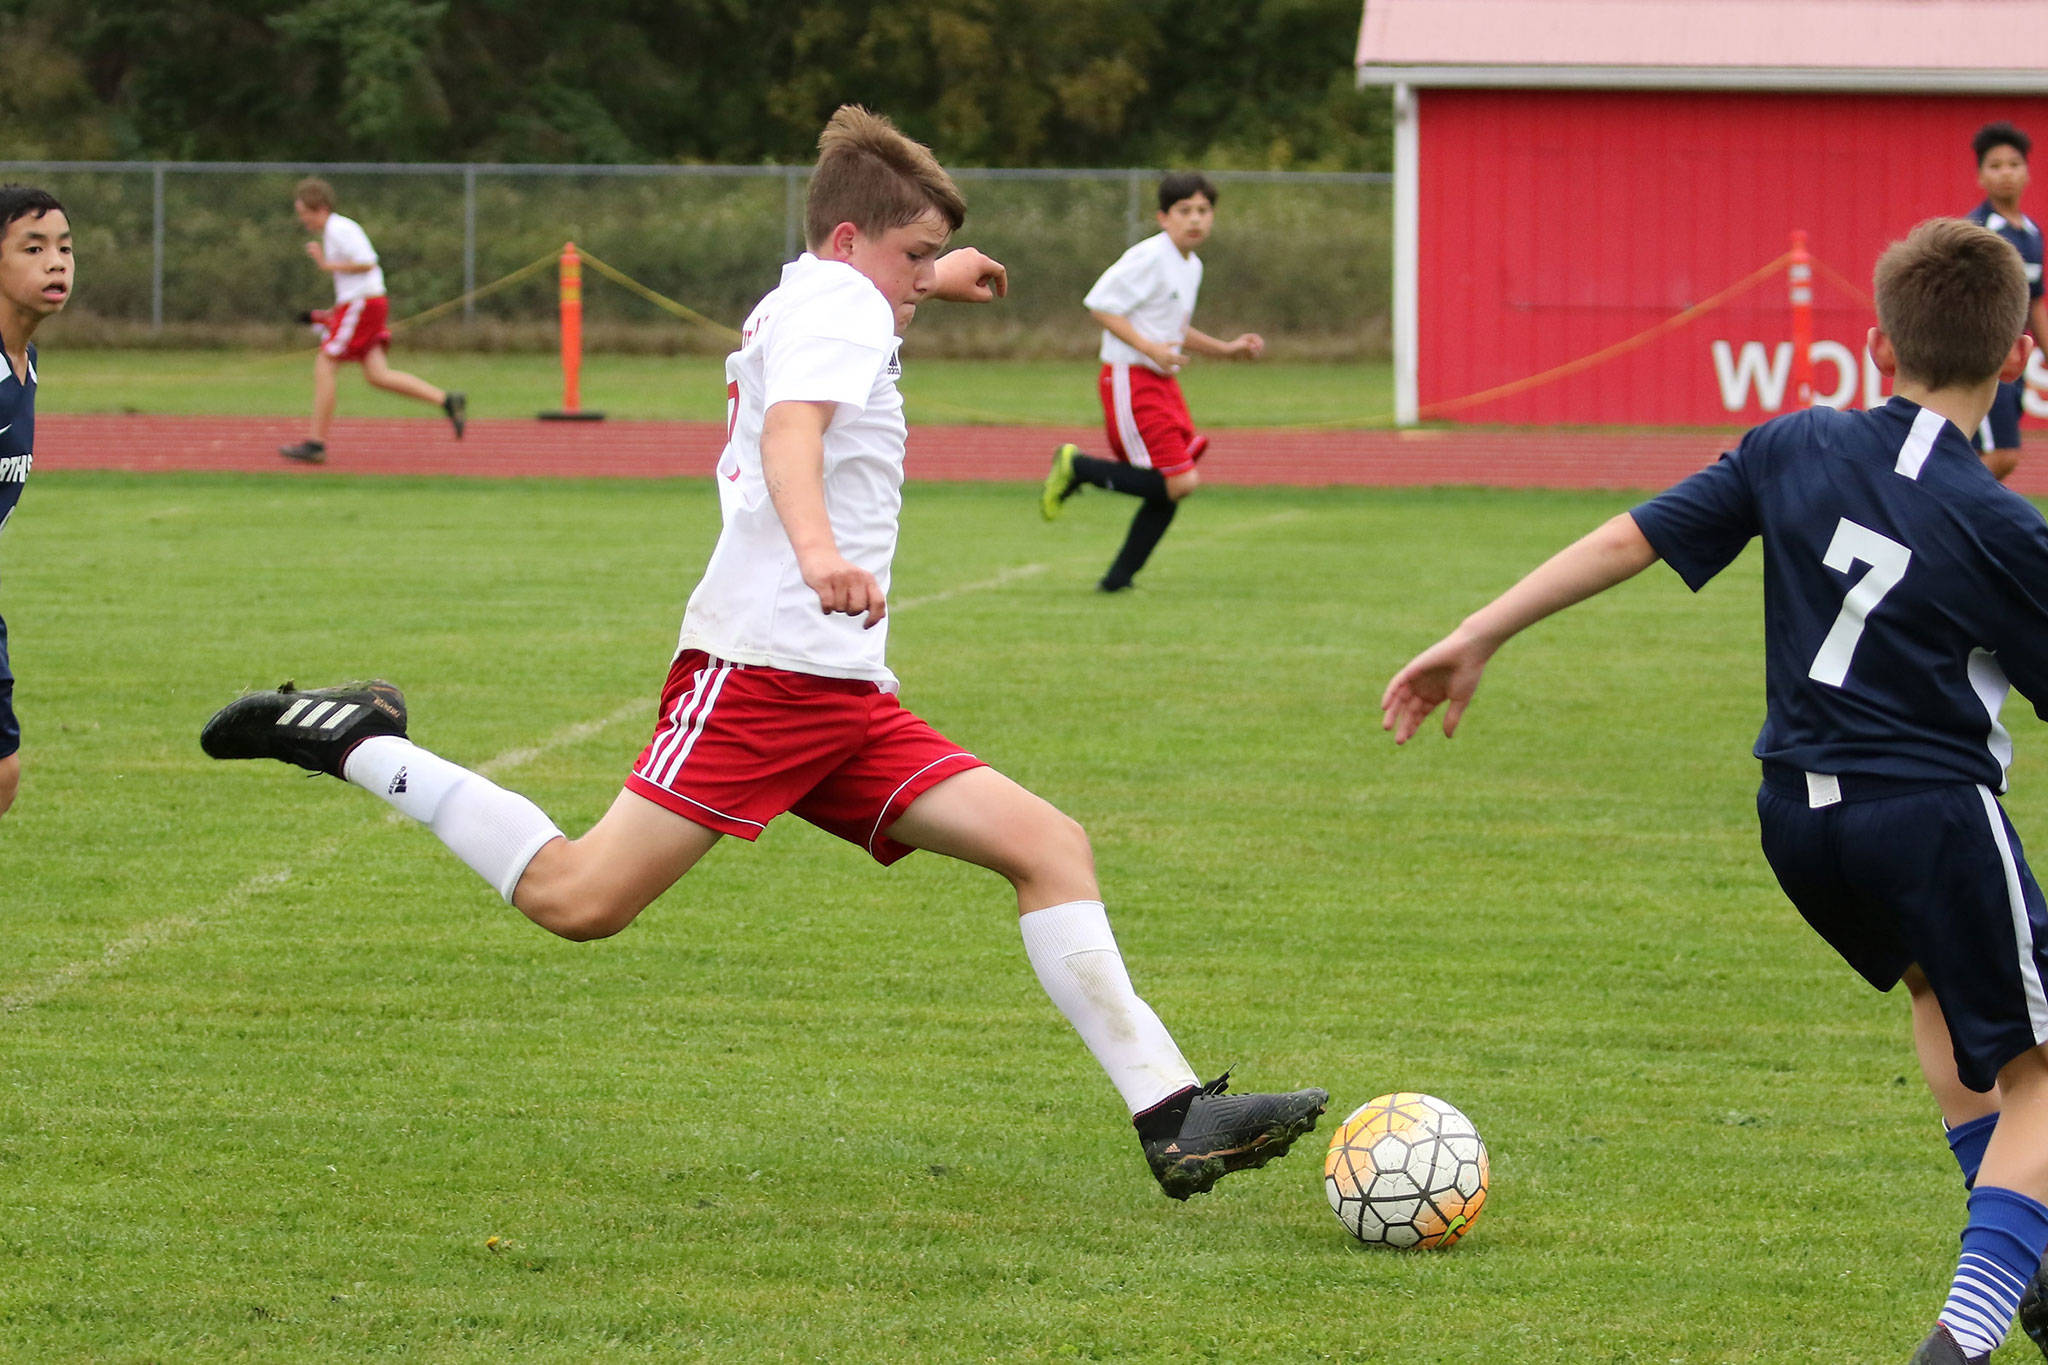 Coupeville’s Logan Downes gives the ball a boot in the Wolves first middle school soccer match Monday. (Photo by John Fisken)